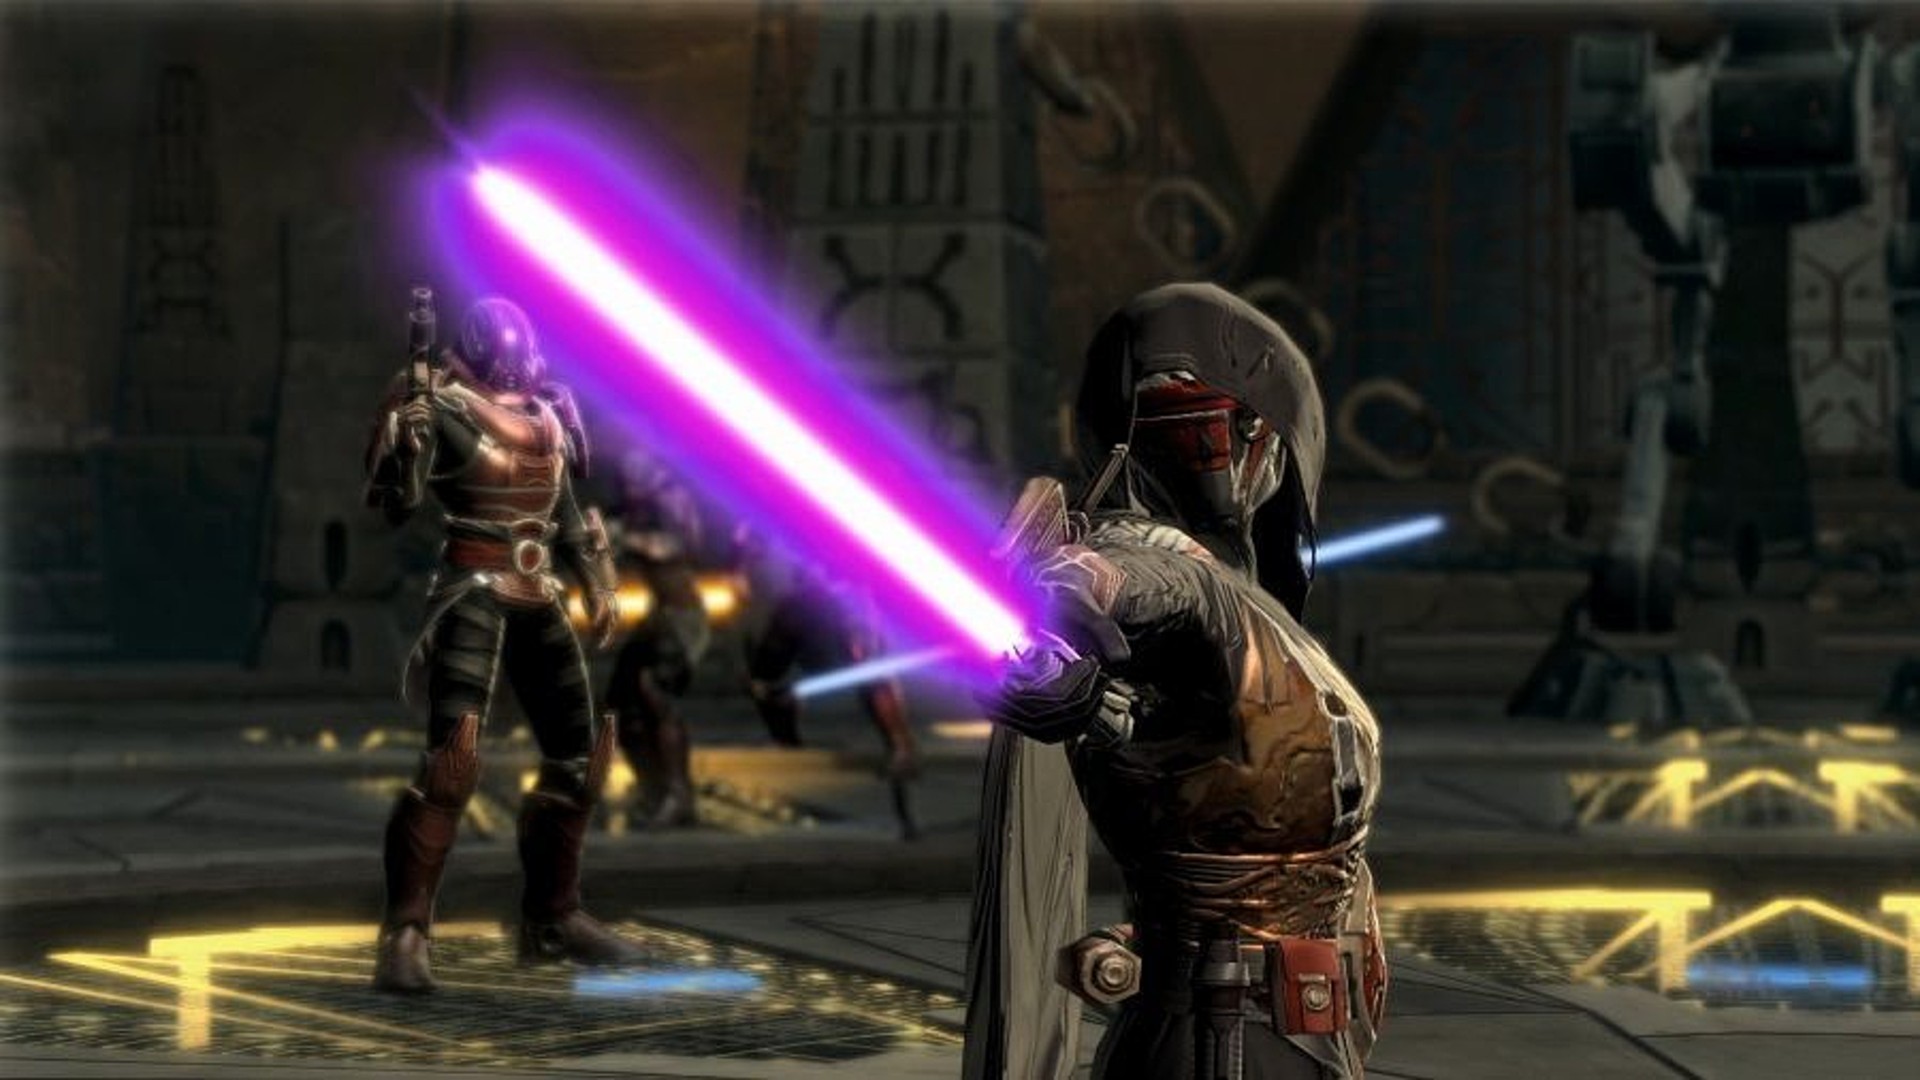 Best free PC games: Star Wars: The Old Republic. Image shows a lightsabre battle about to commence.